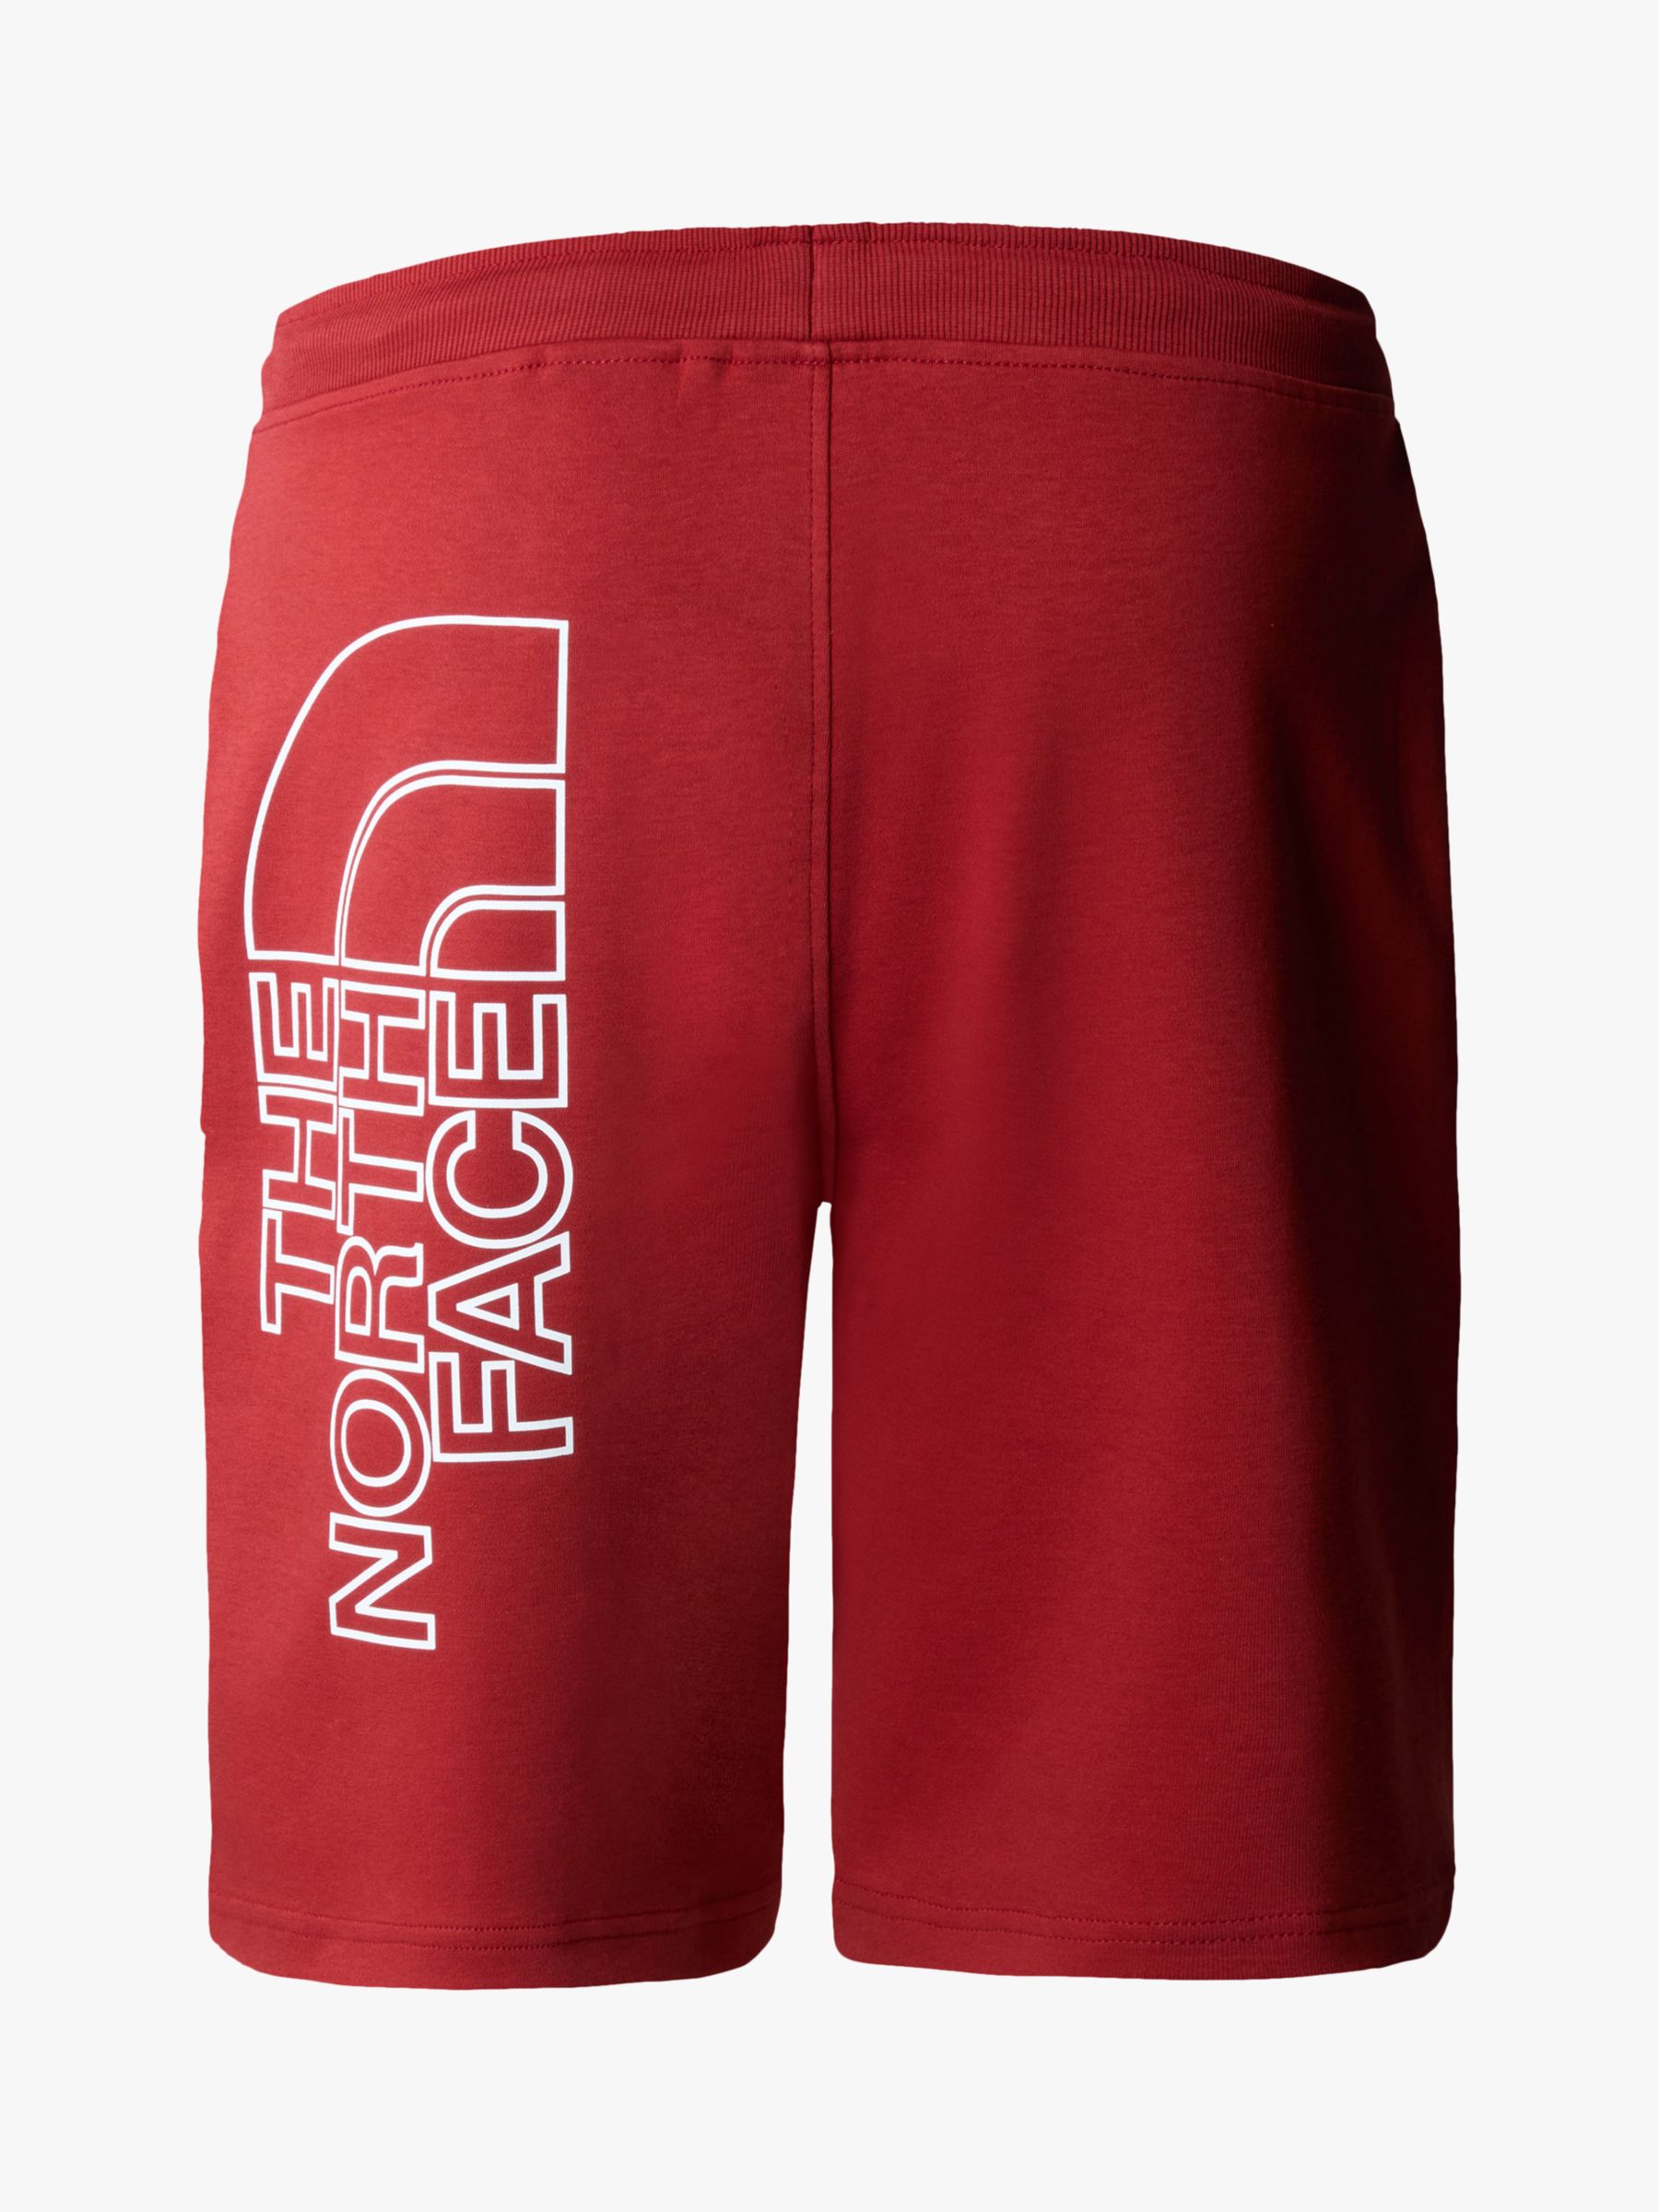 The North Face Graphic Short, Red, S